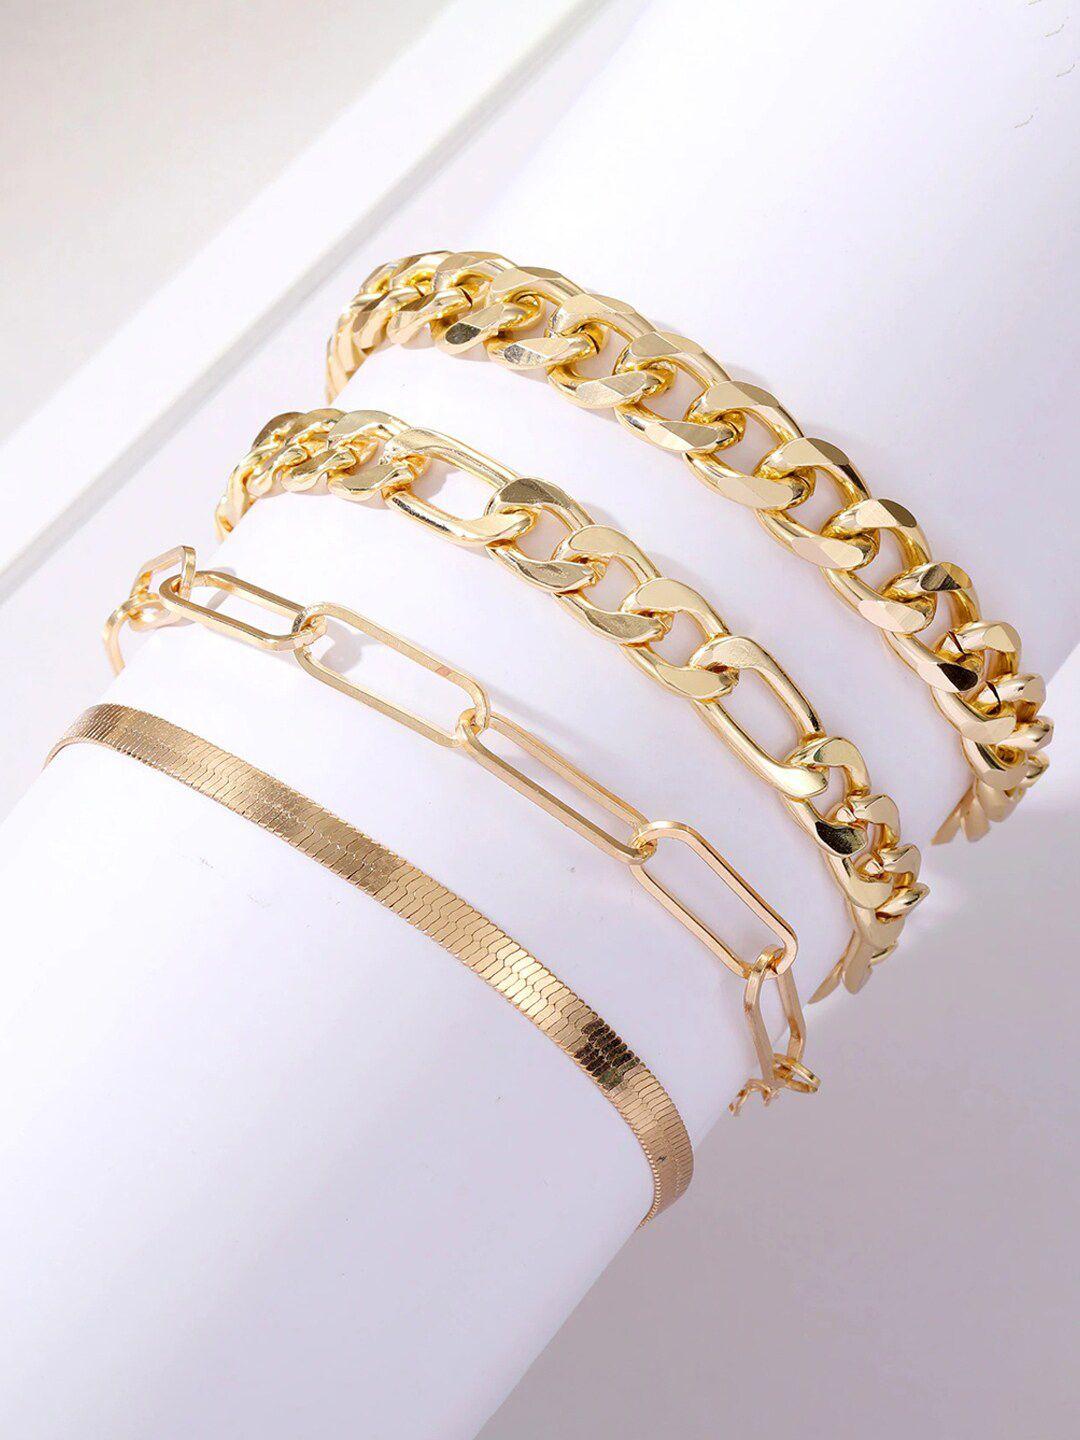 jewels-galaxy-women-pack-of-4-gold-plated-charm-bracelet